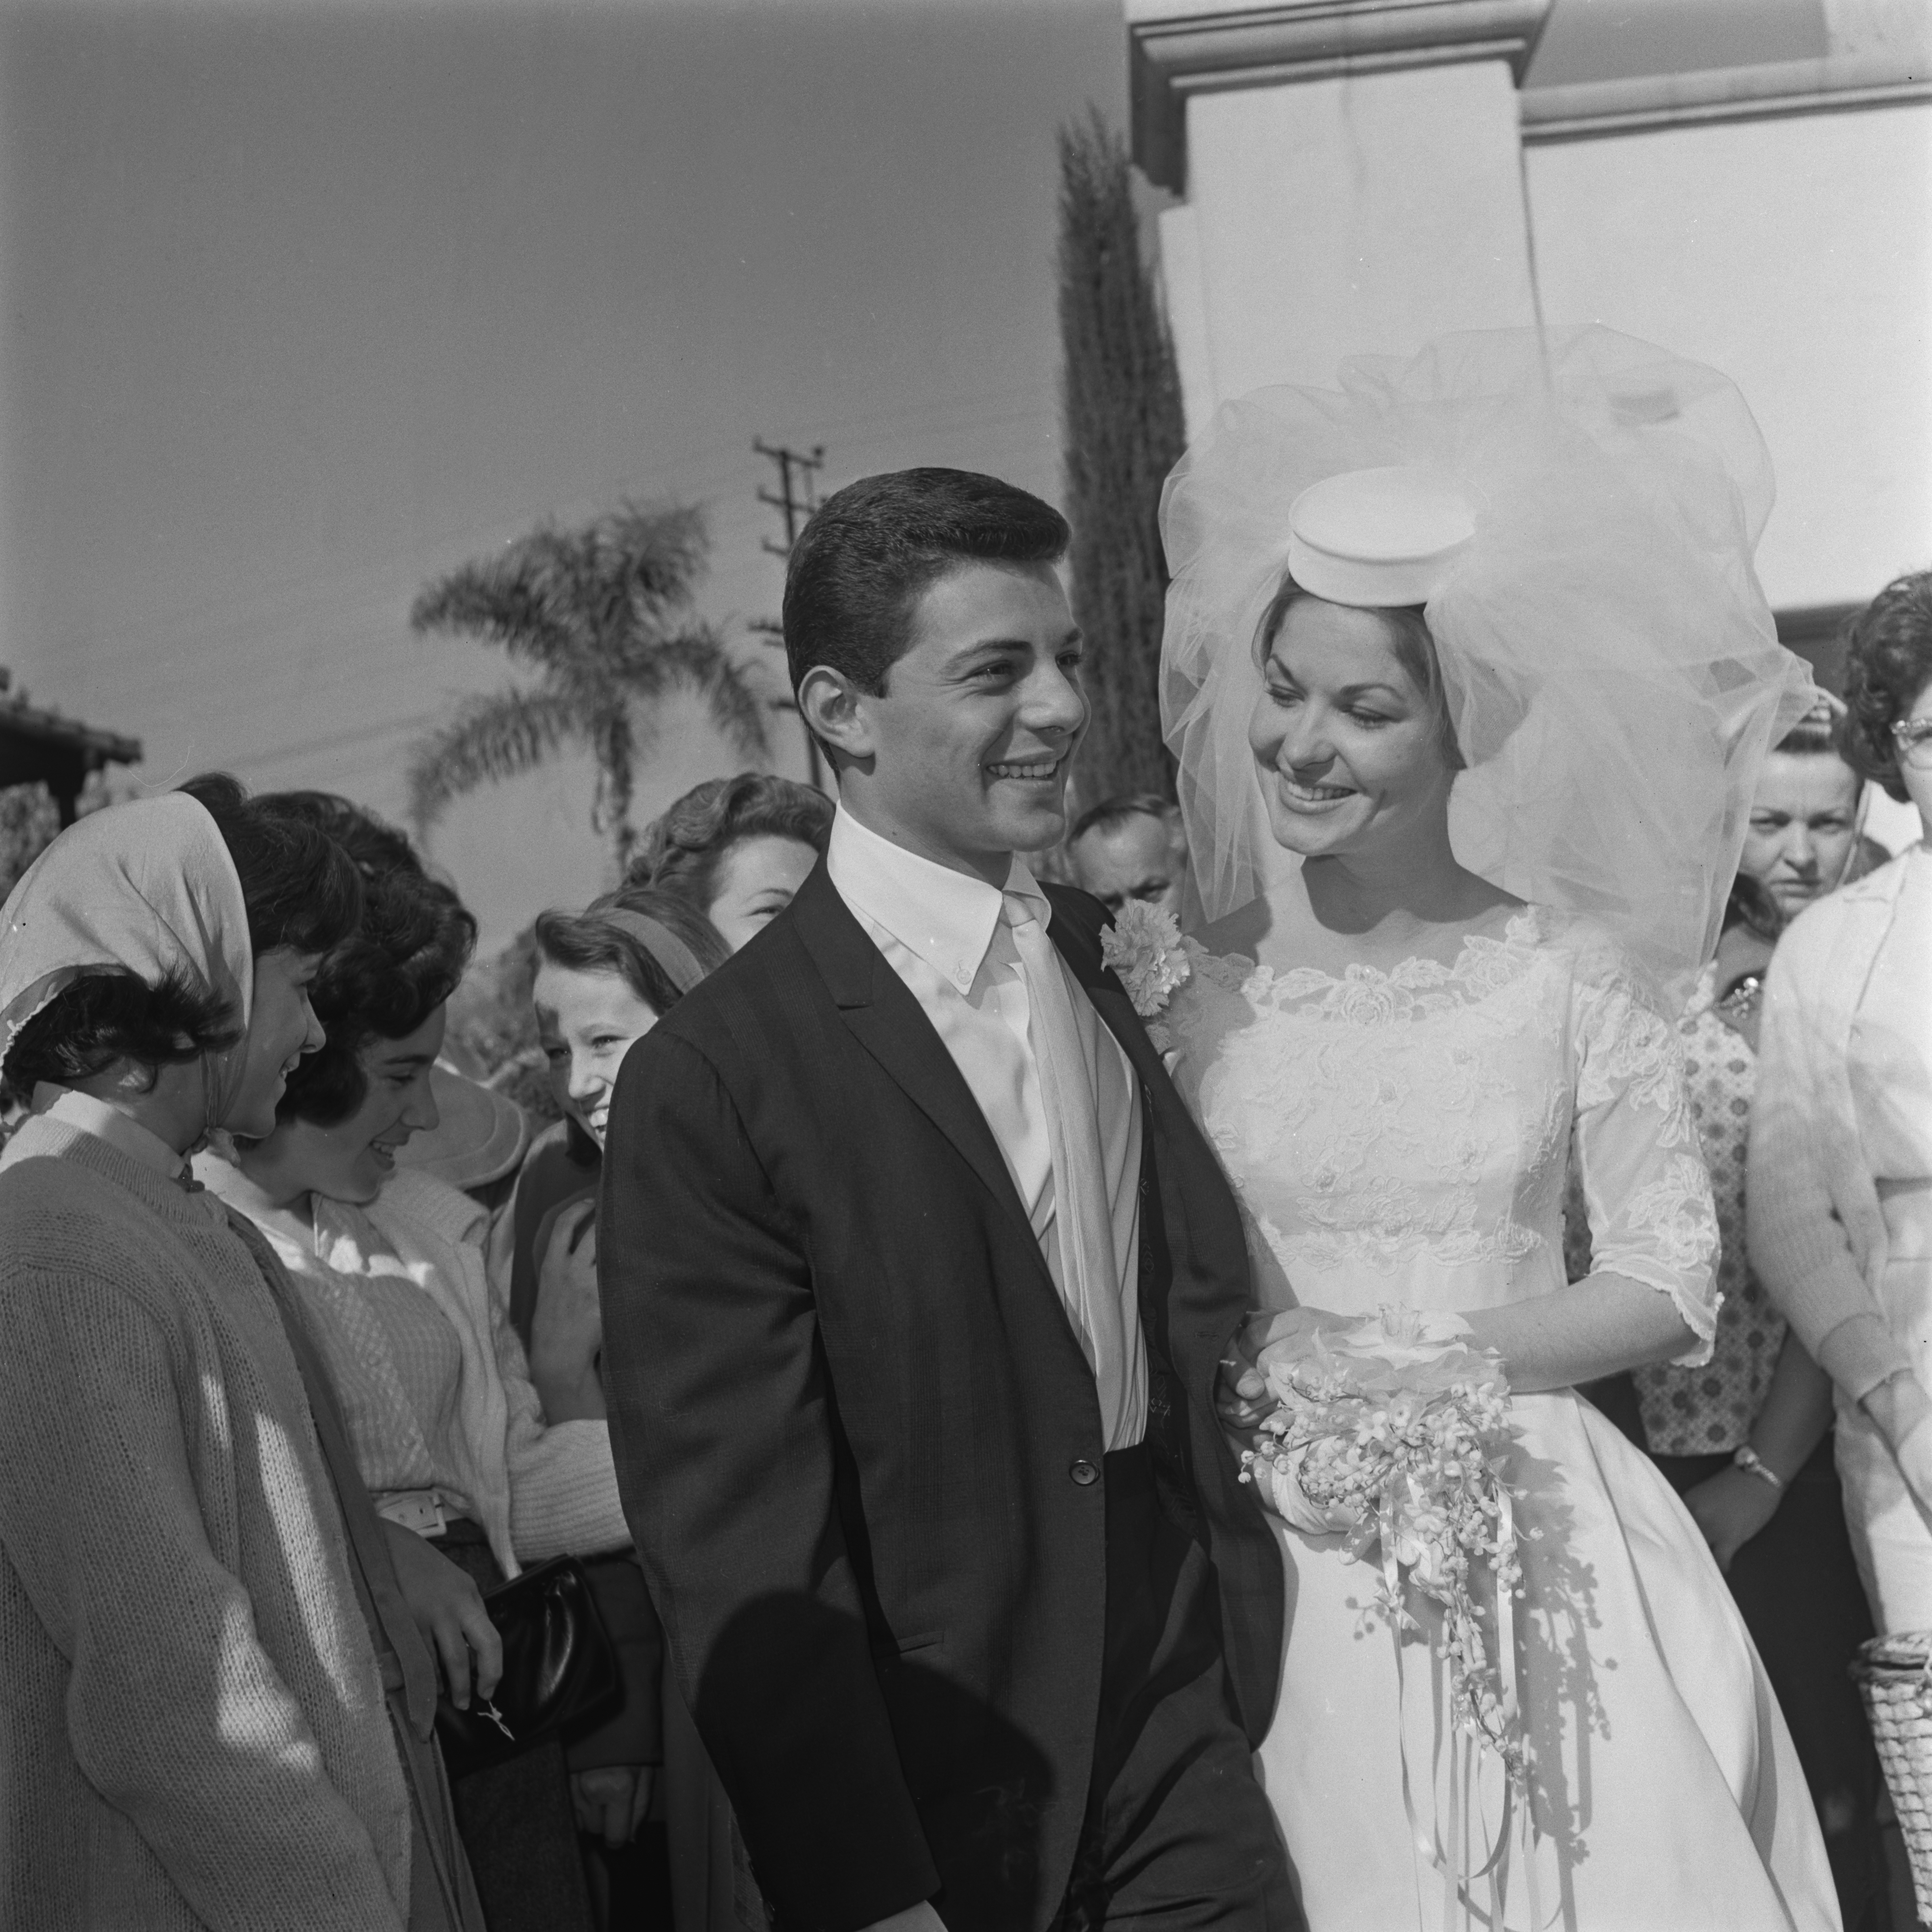 American actor and singer Frankie Avalon with his bride Kathryn 'Kay' Diebel after their wedding in North Hollywood, California on January 19, 1963. | Source: Getty Images